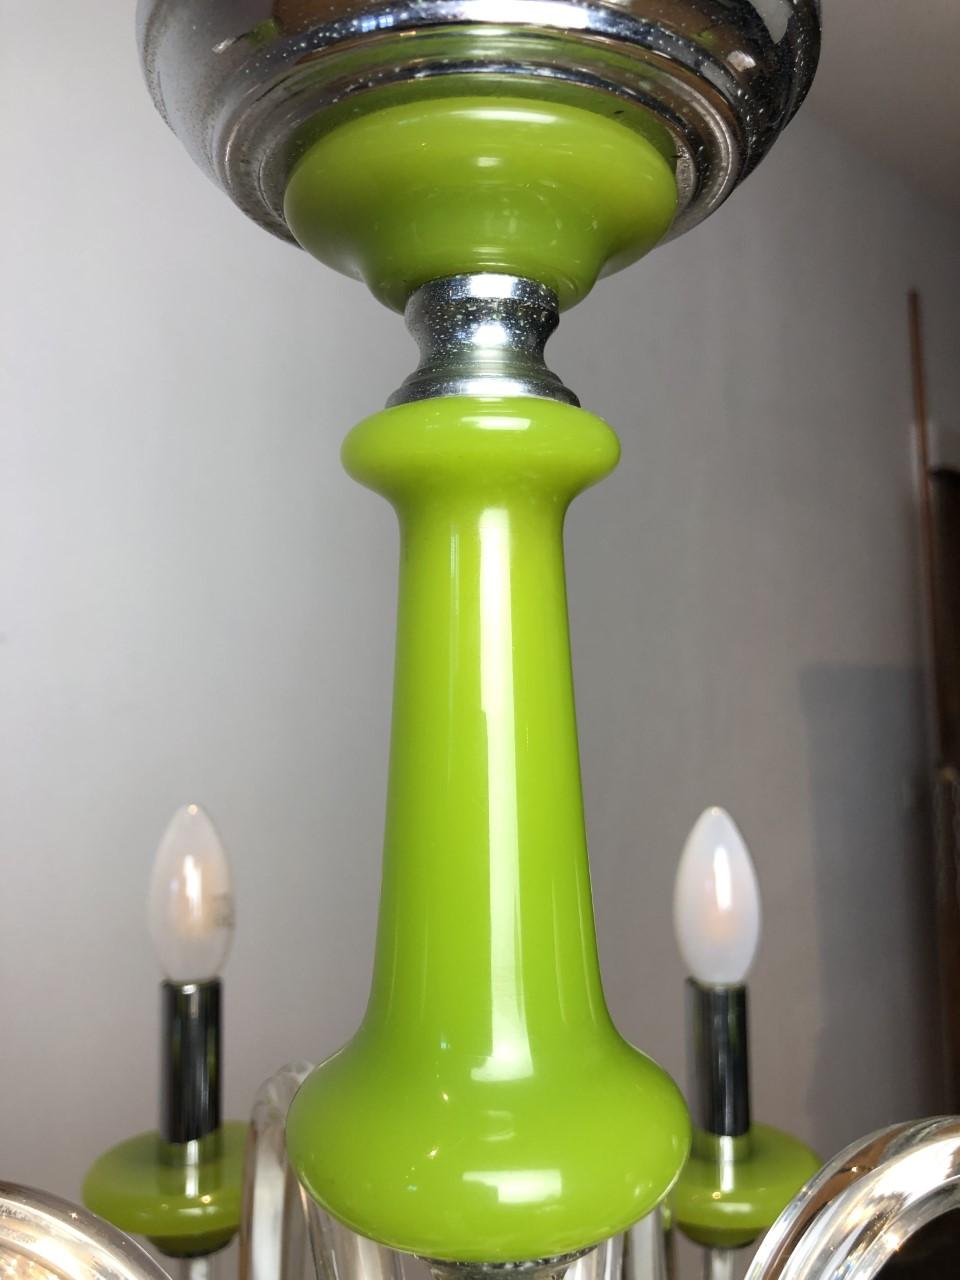 Green Murano Glass chandelier. 
An 8-armed Murano chandelier from the Mid-20th Century. 
This ceiling light has 8 curling arms with beautiful green glass details. 
Vintage Italian lighting - Italian chandelier.
Green - bright green - leaf green.

Do